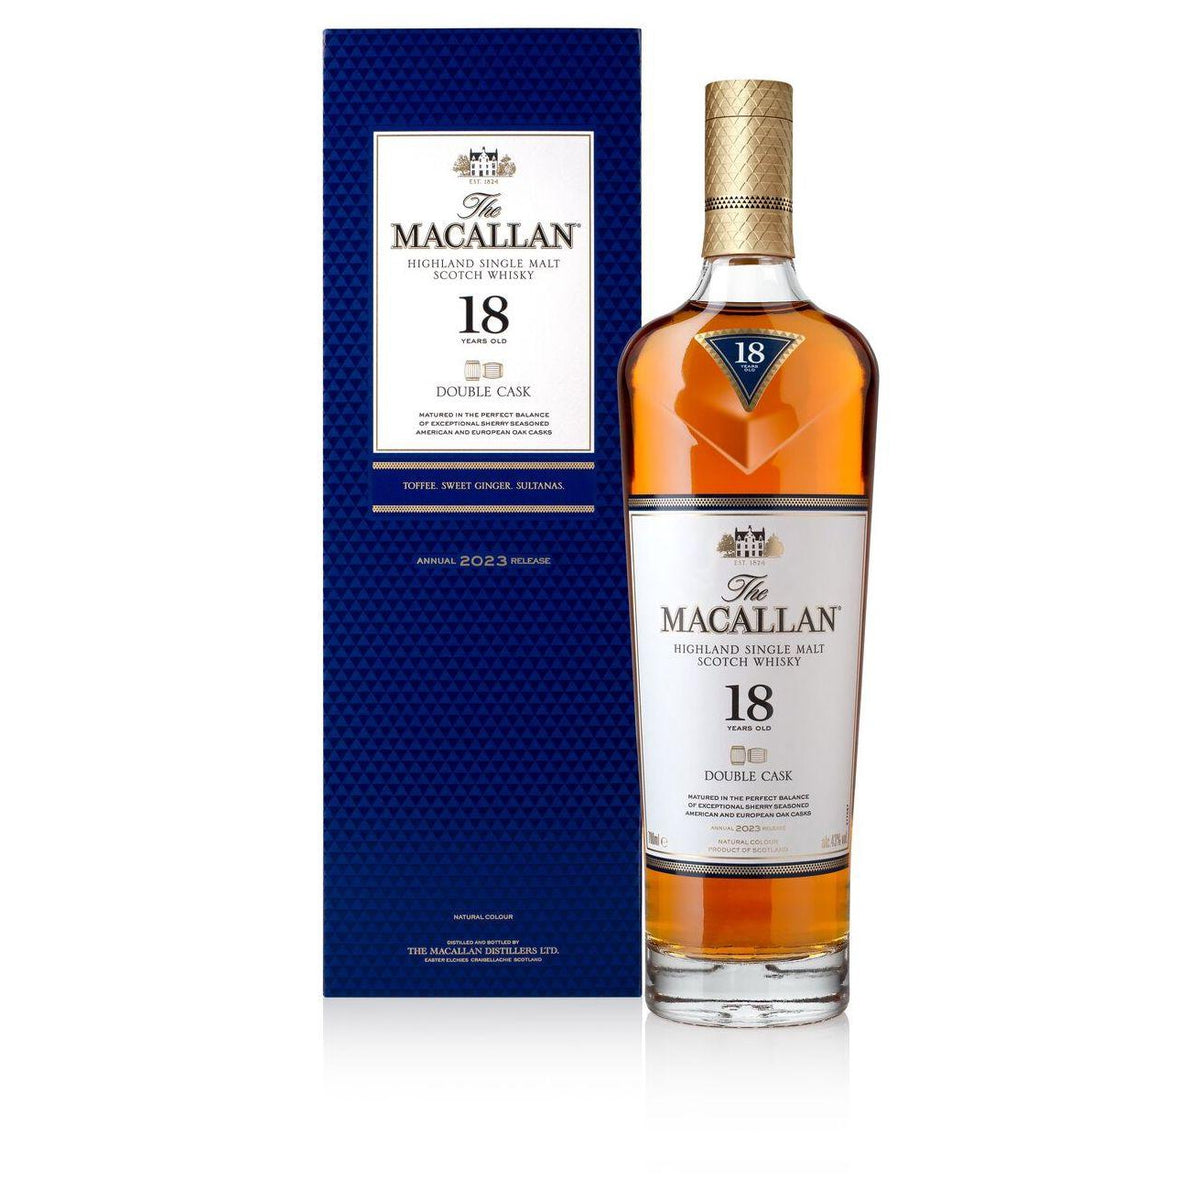 The Macallan Highland Single Malt Scotch Whiskey 18 Years Old Double Cask Annual 2023 Release